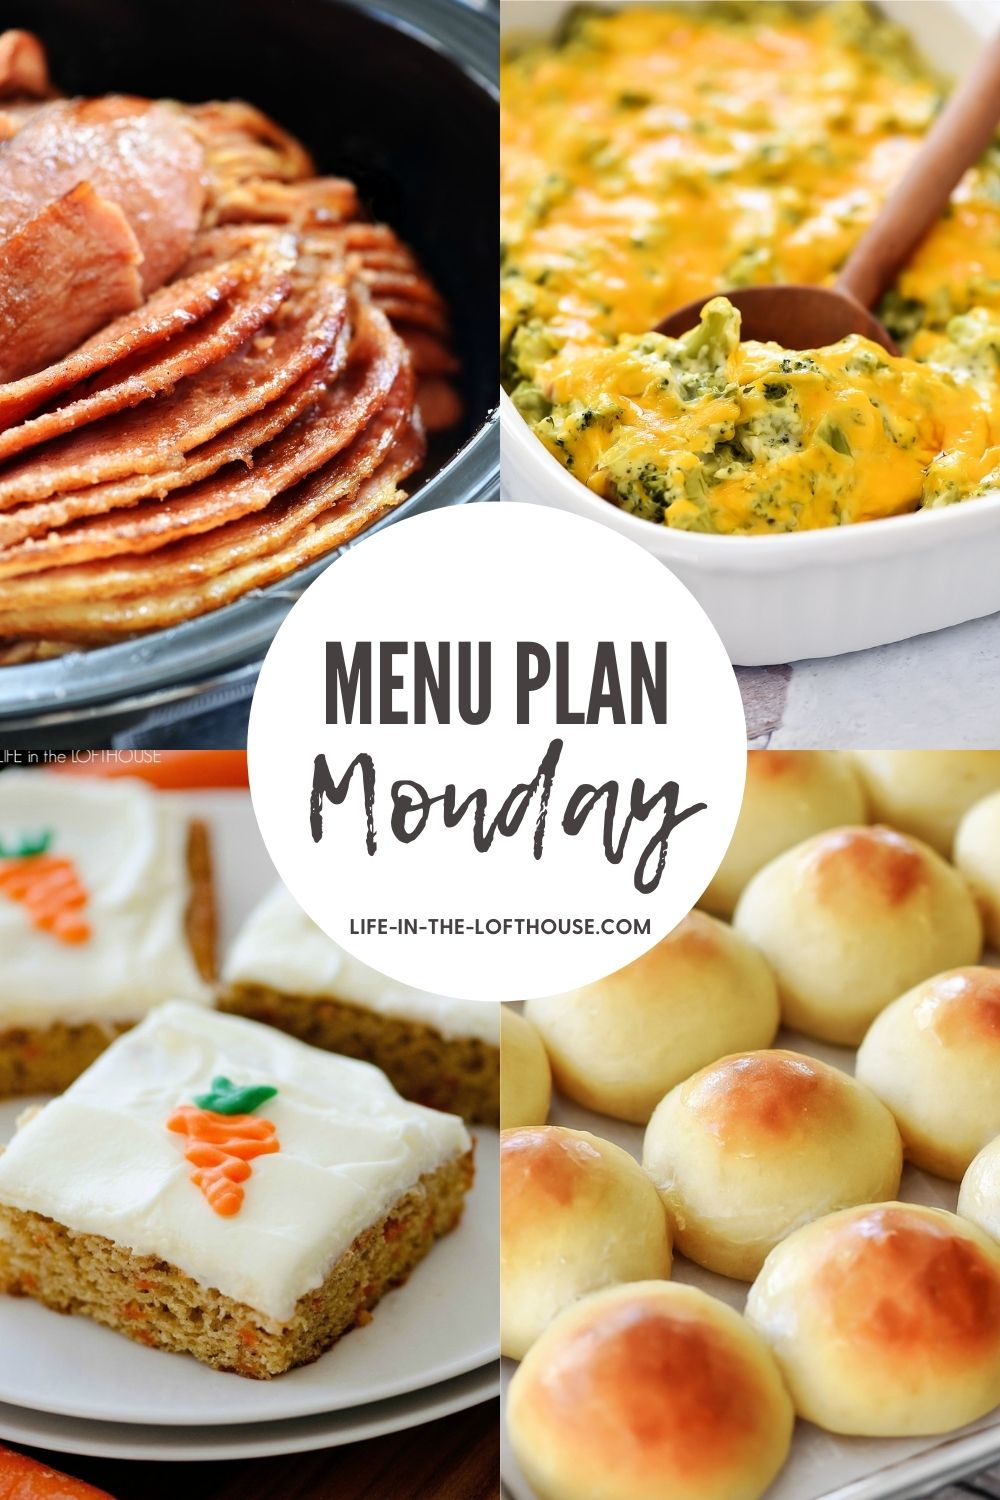 Menu Plan Monday is a list of delicious recipes. Life-in-the-Lofthouse.com